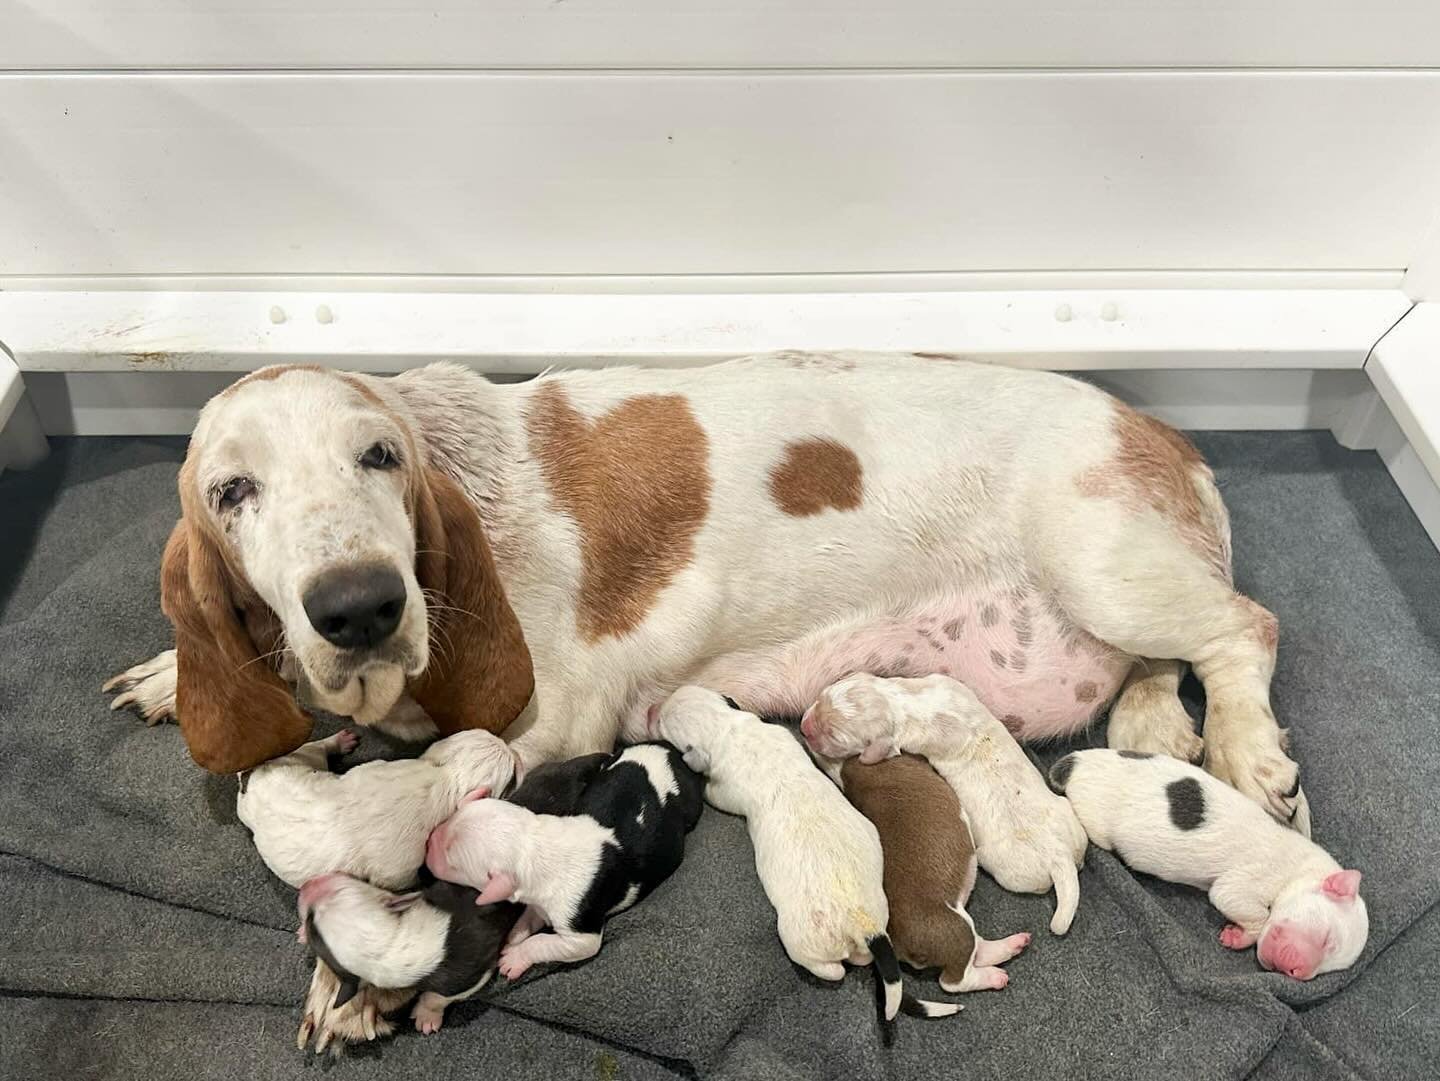 It&rsquo;s hard enough for a dog on the streets - staying safe, finding food and shelter. Add fleas to the list and especially puppies and kittens can develop life-threatening flea anemia, but it can affect animals of all ages. Thankfully, this mama 